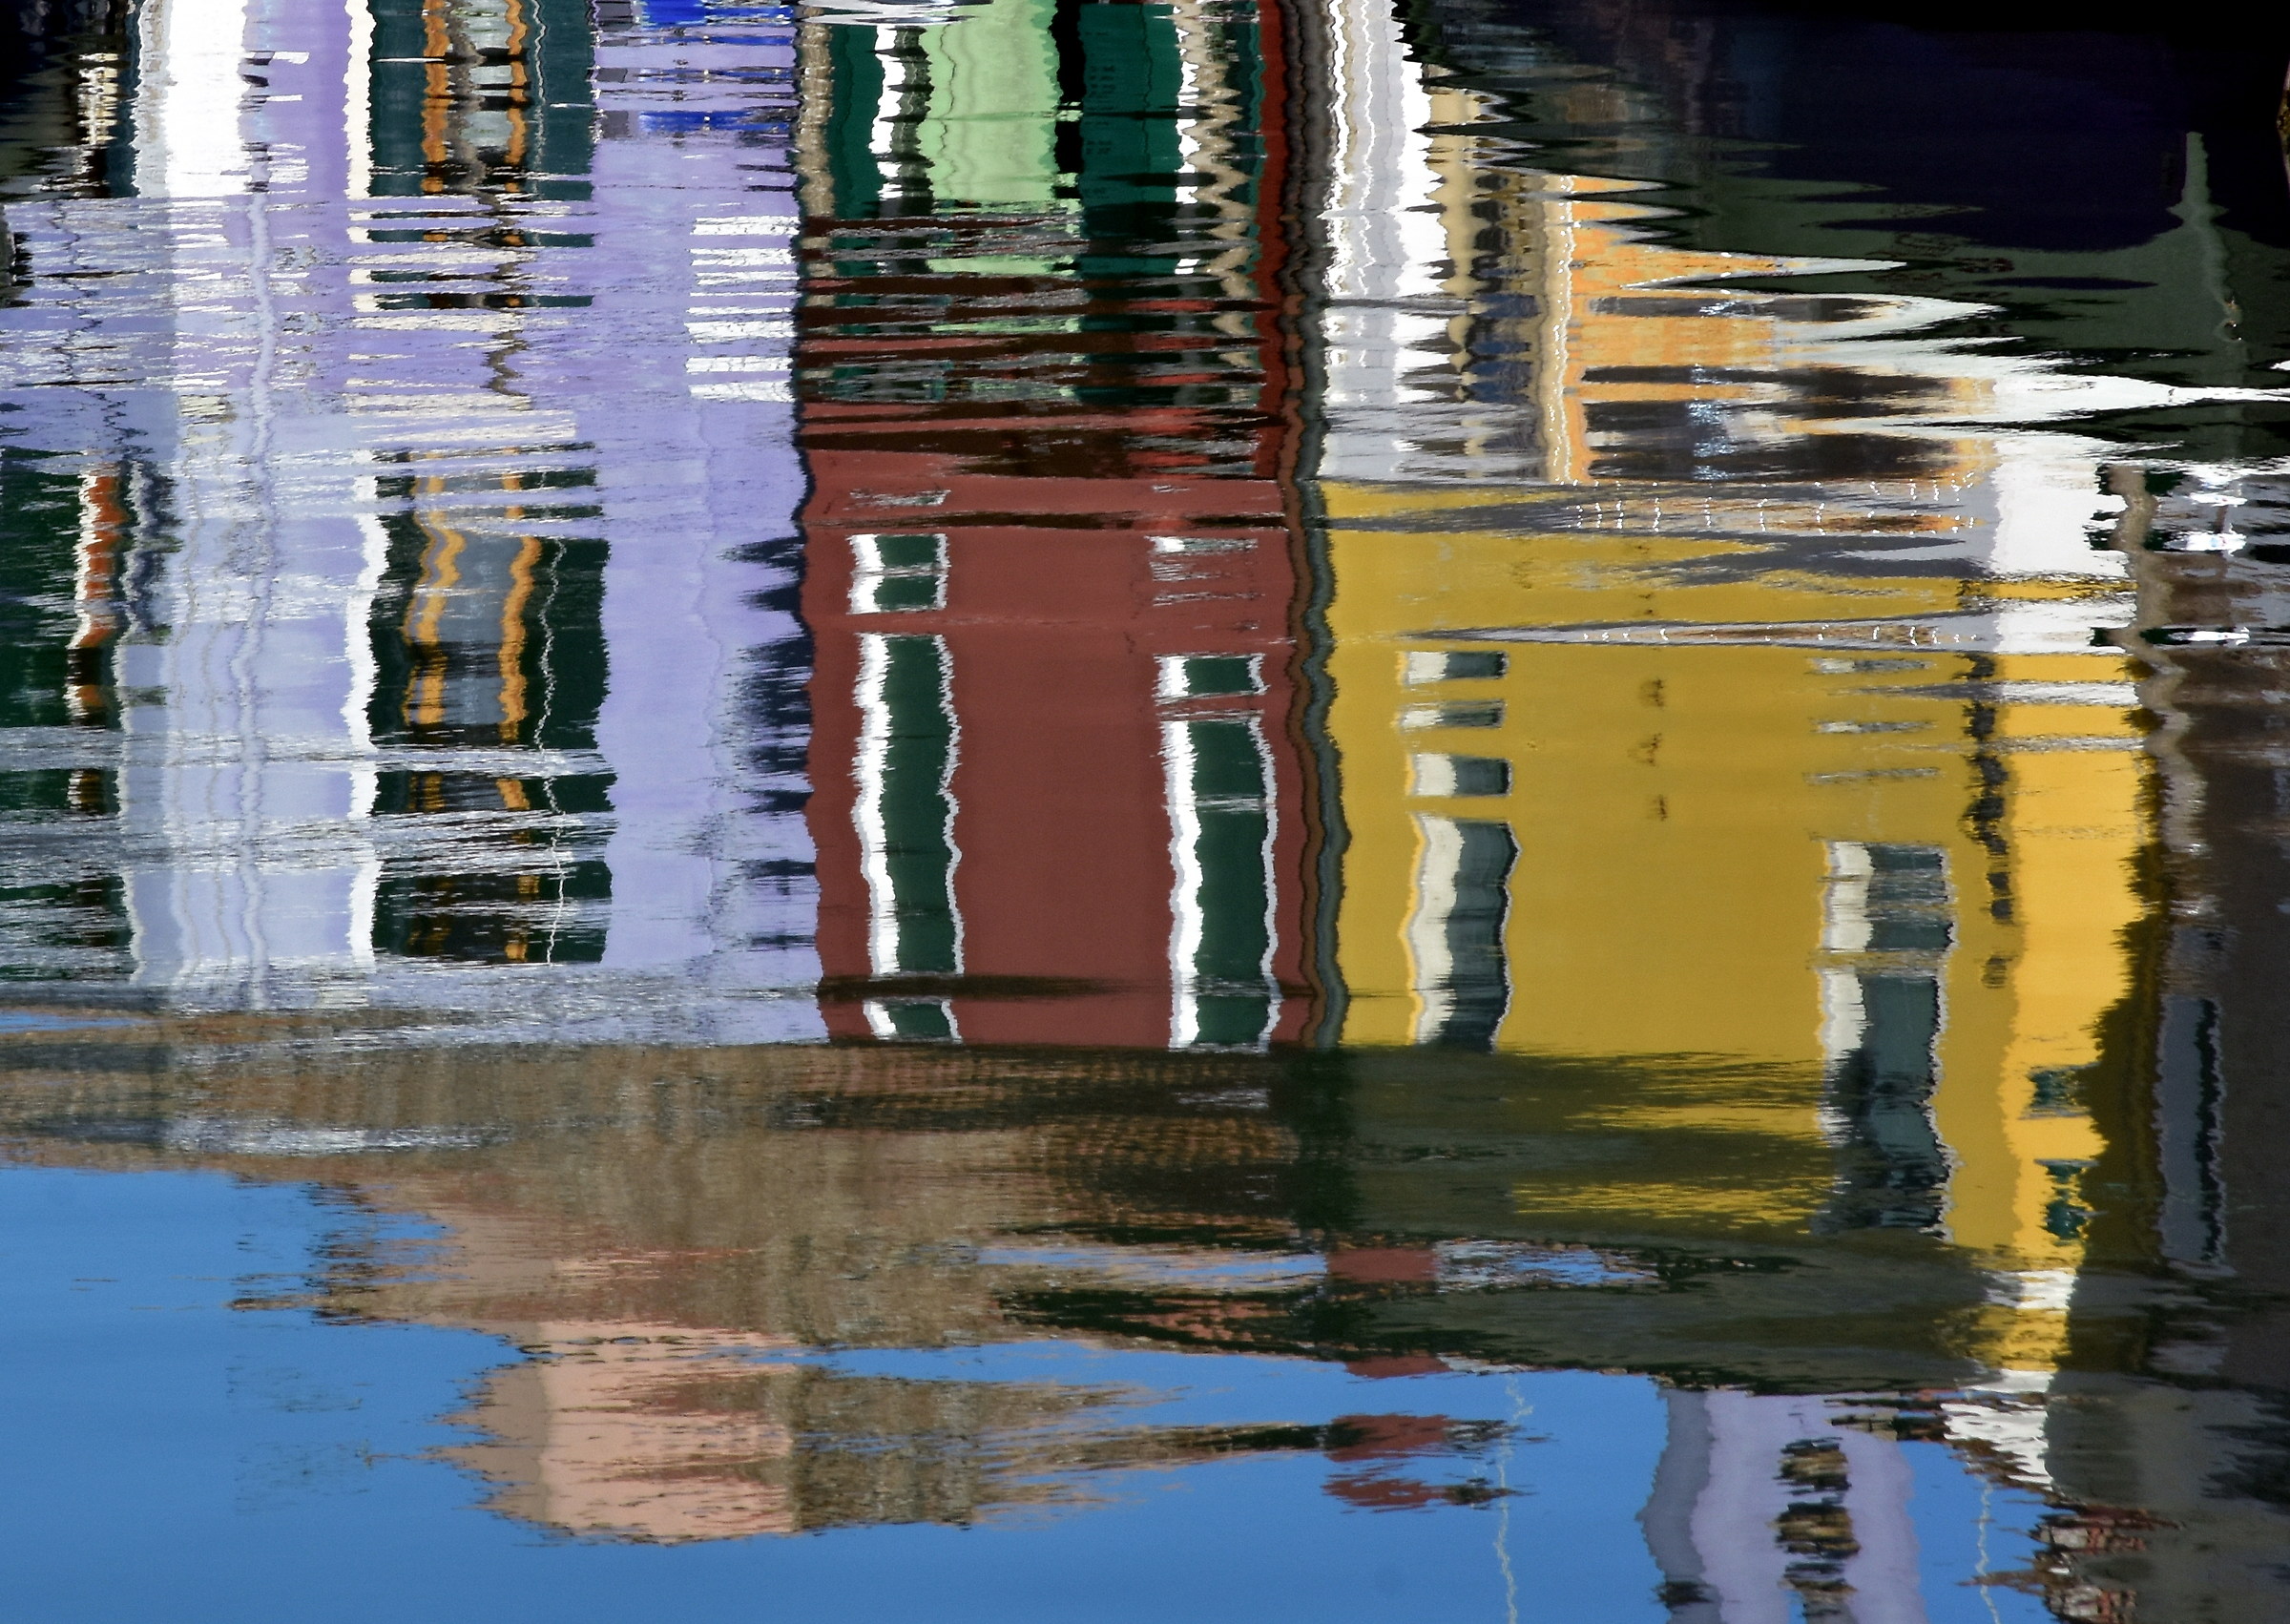 Reflections and colors in Burano...